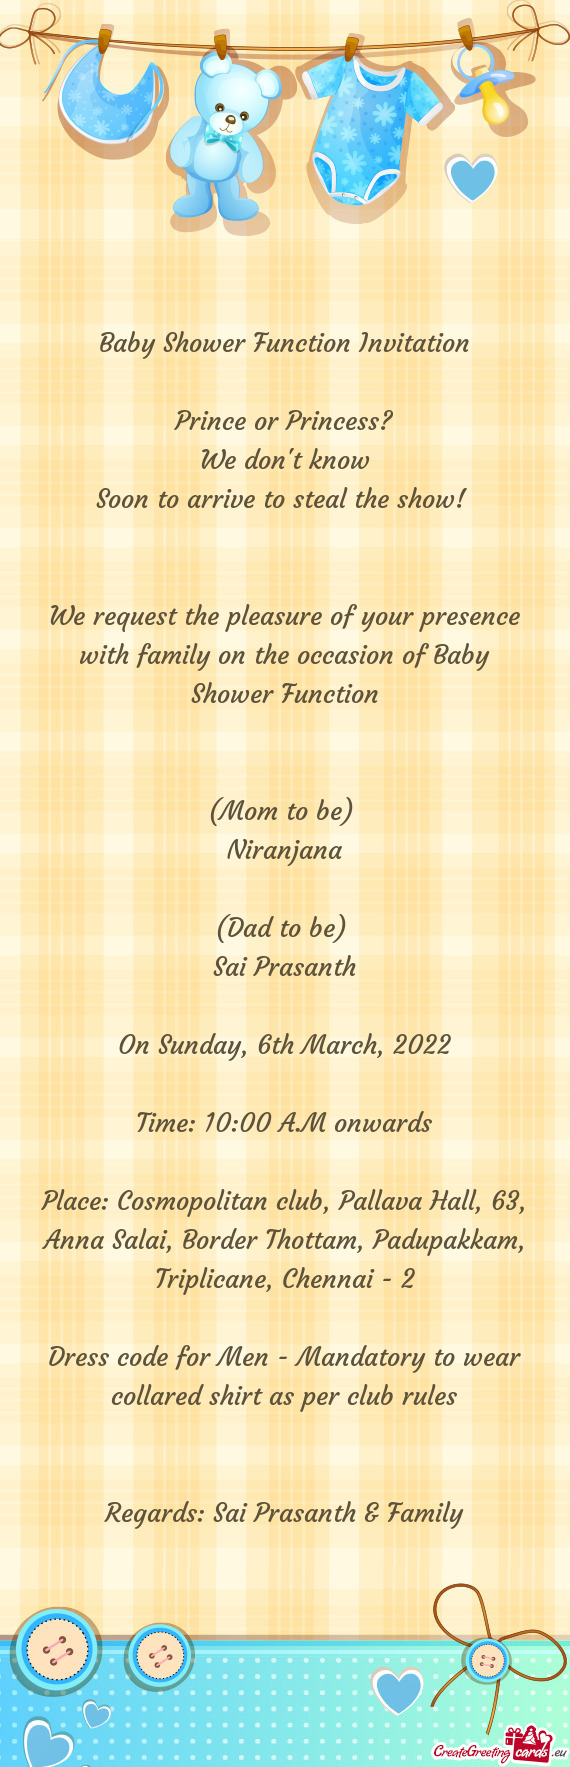 We request the pleasure of your presence with family on the occasion of Baby Shower Function